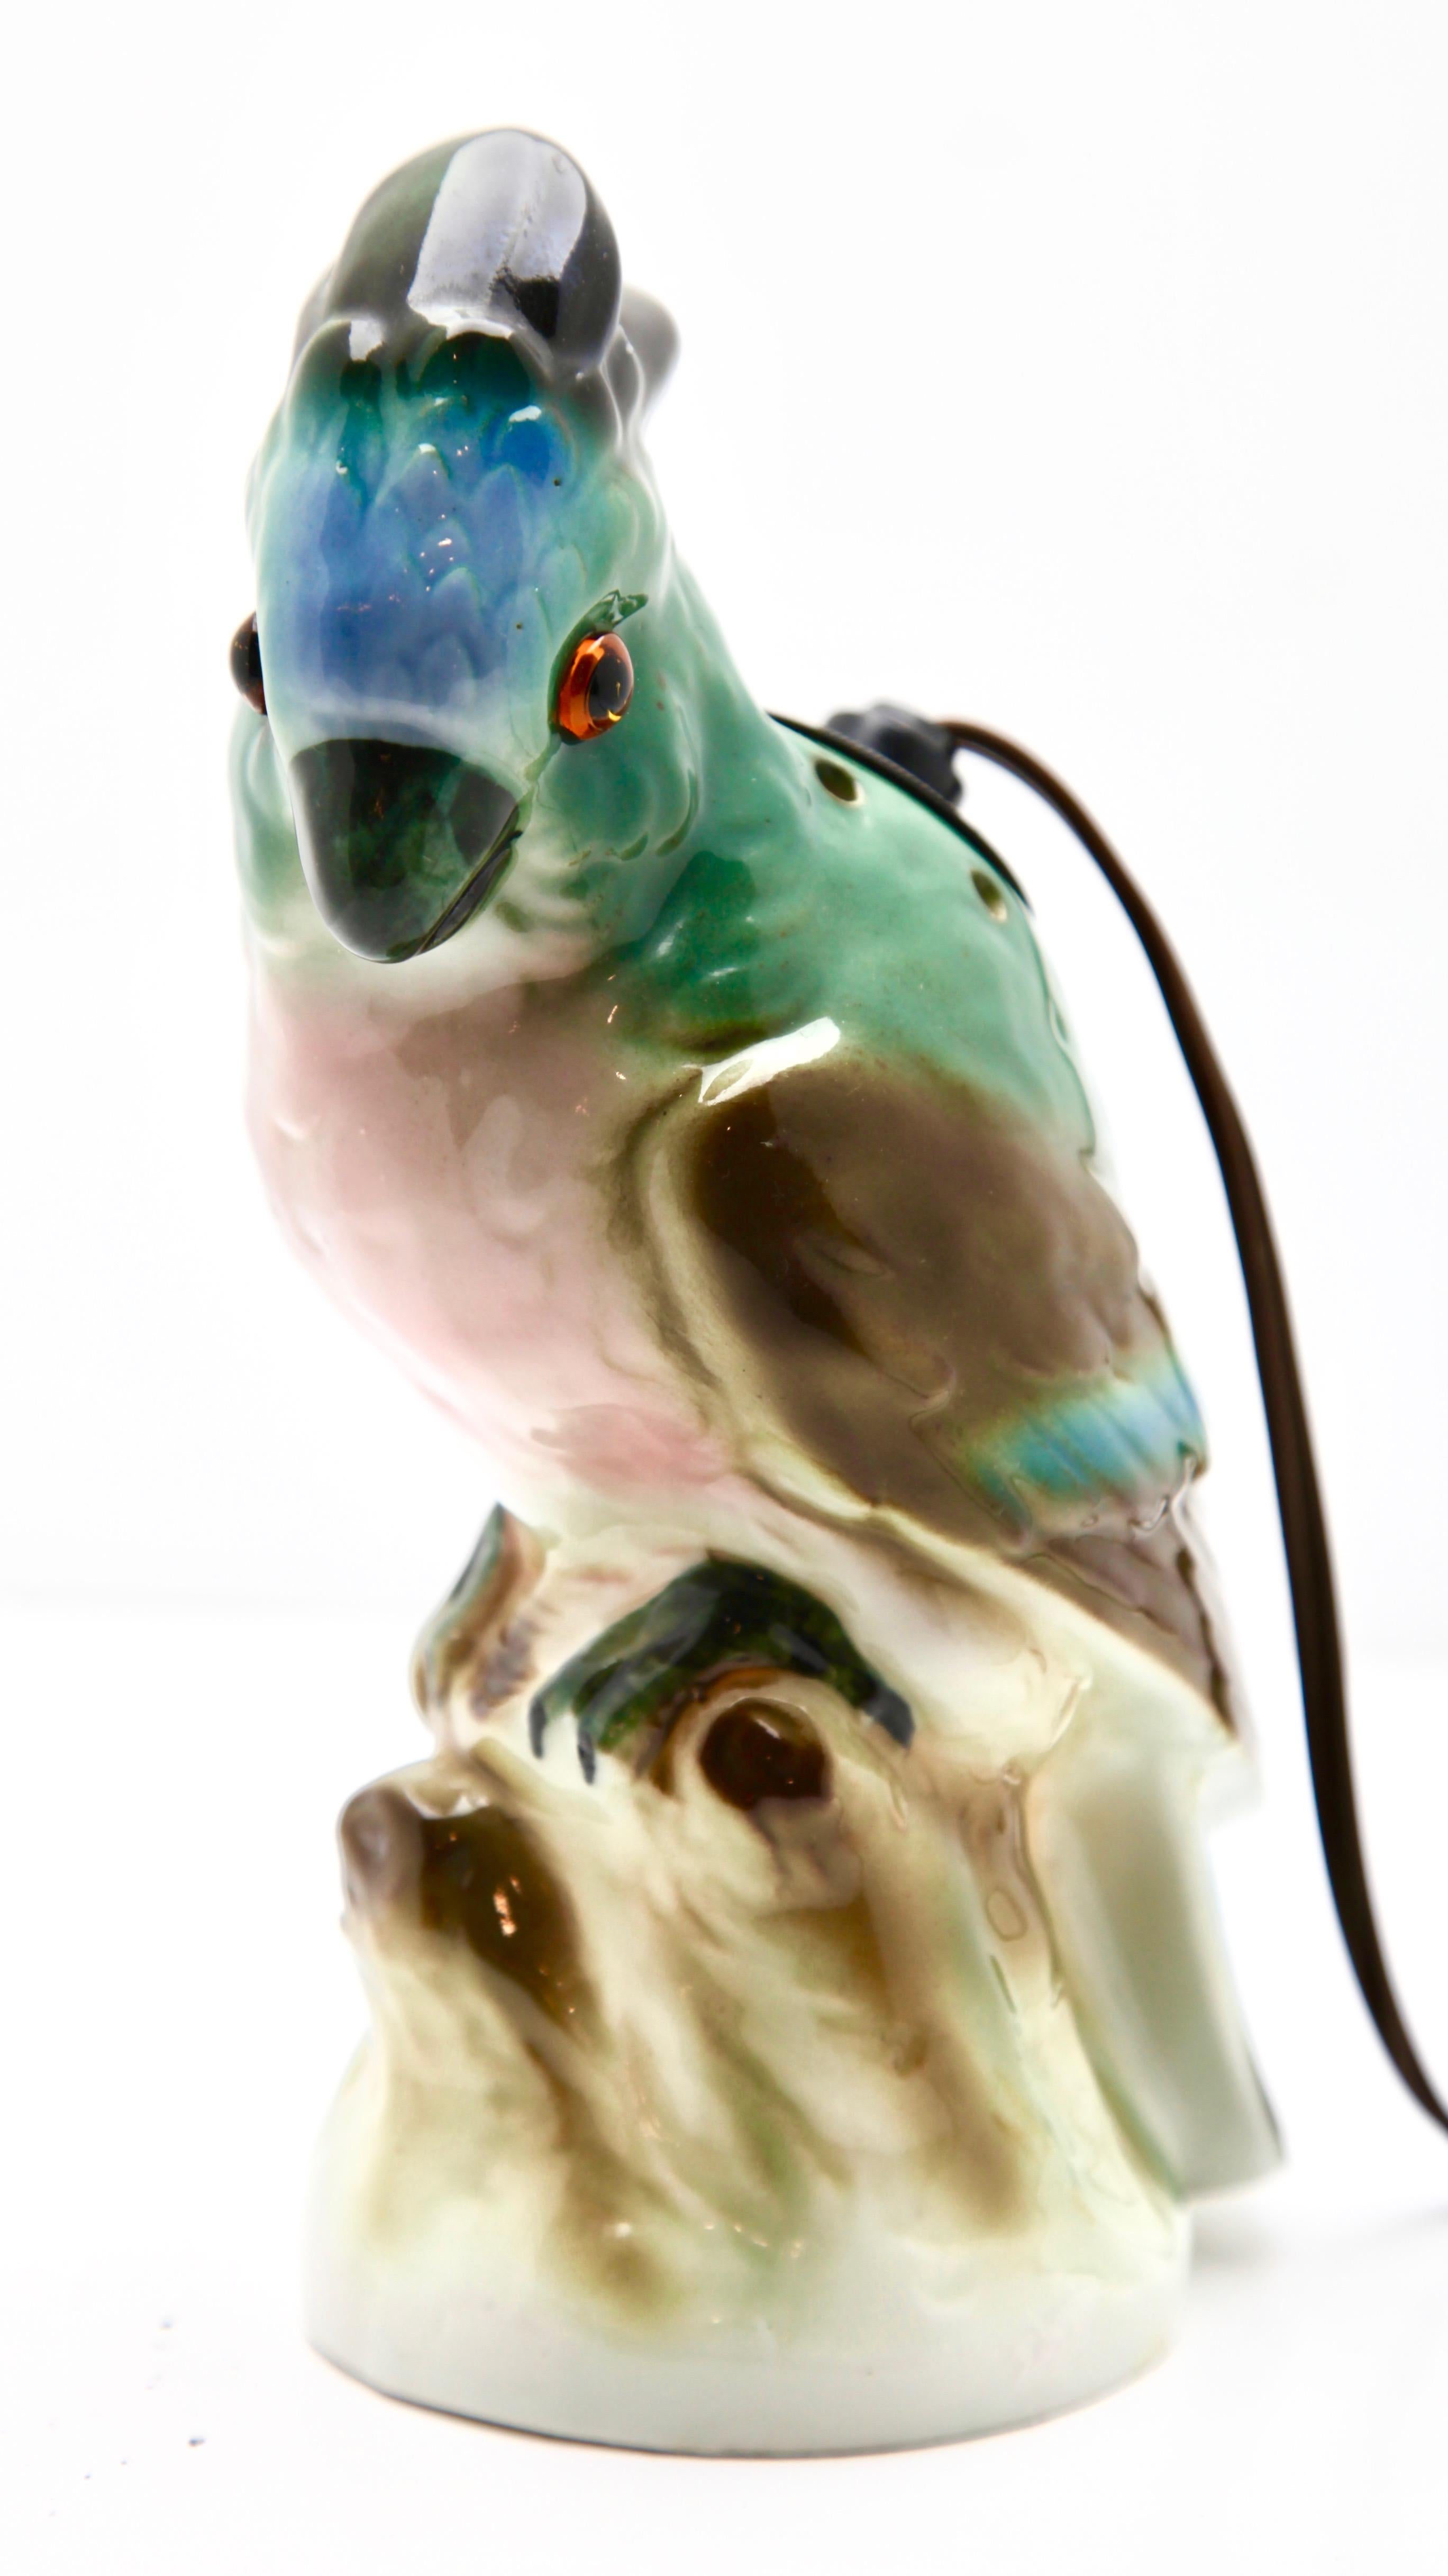 Made in Germany during the 1930s, this porcelain figurine is also a room aromiser and nightlight or table lamp.
Modelled as a cockatoo perched on a rock with hand painted plumage in blues, browns and greens. This friendly bedside companion features